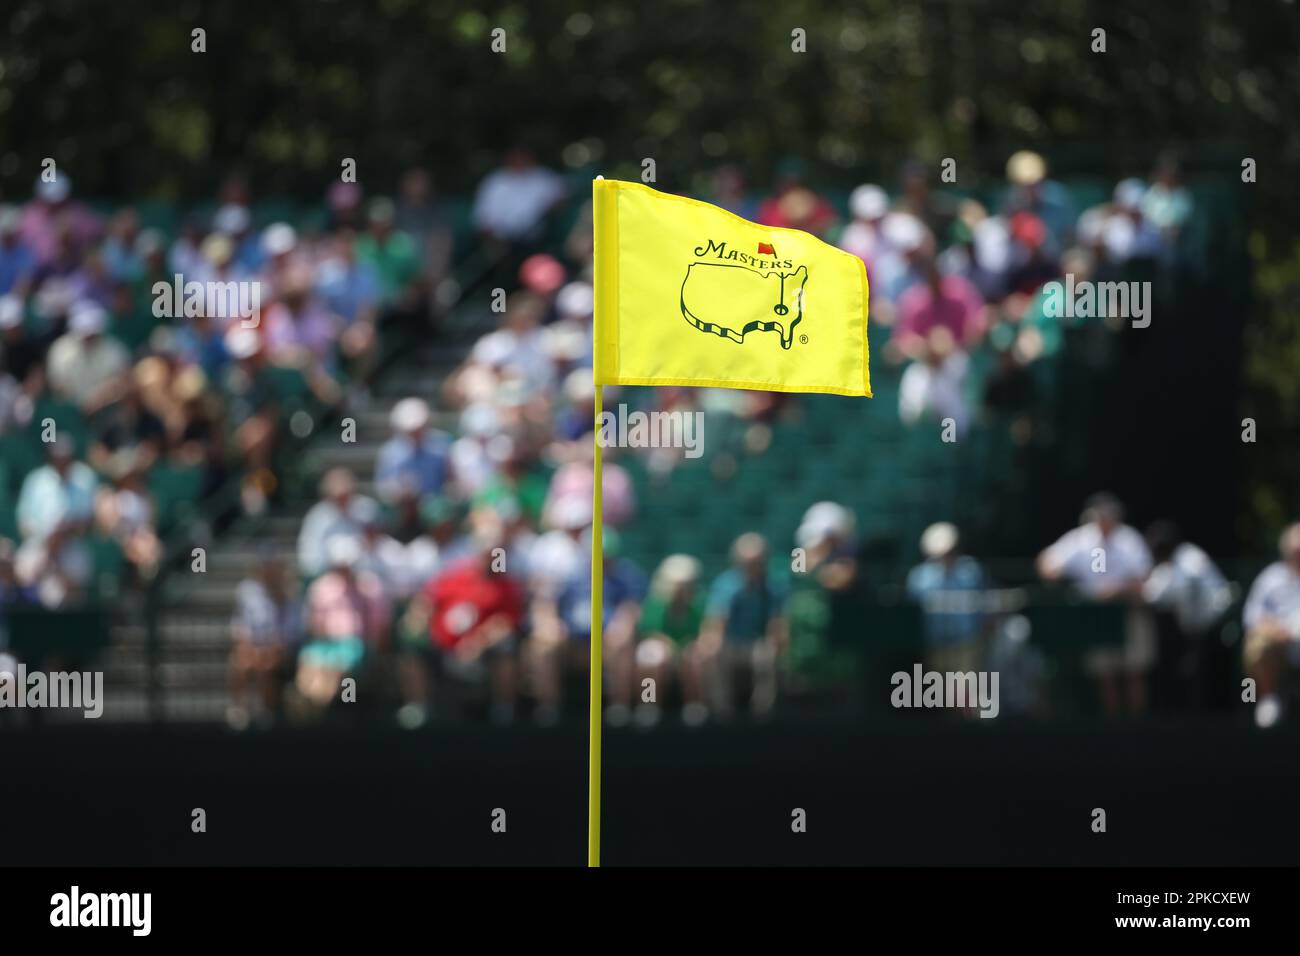 General View Of A Masters Flag During The Day 1 Of The 2023 Masters Golf Tournament At The Augusta National Golf Club In Augusta Georgia United States On April 6 2023 Credit Koji Aokiaflo Sportalamy Live News 2PKCXEW 